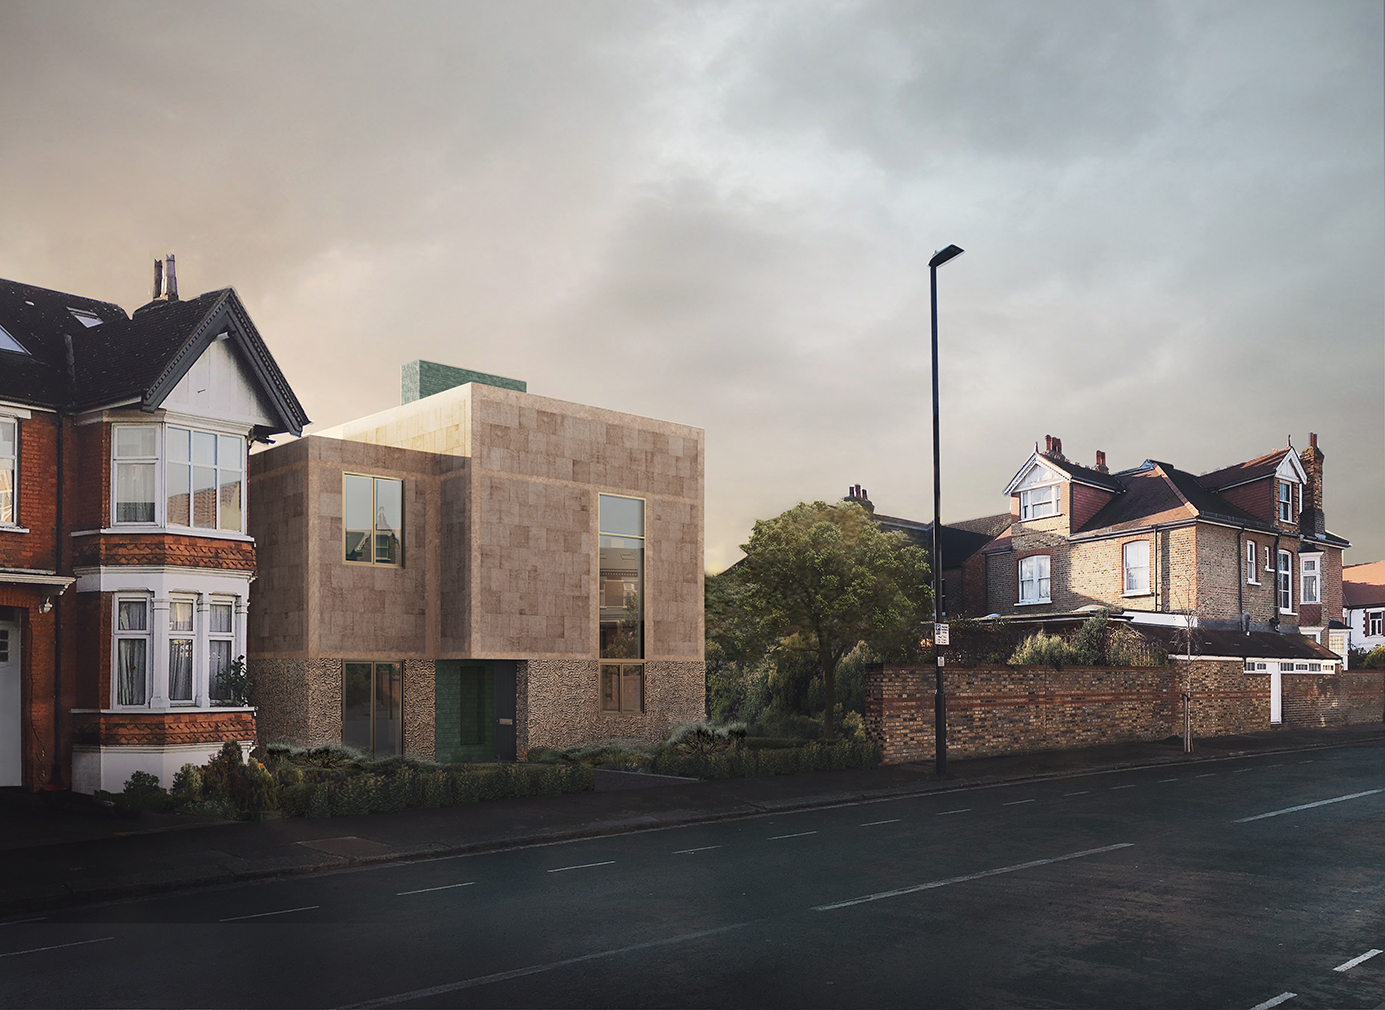 Property start-up Cube Haus taps award-winning British architects to create ‘infill’ prefabs